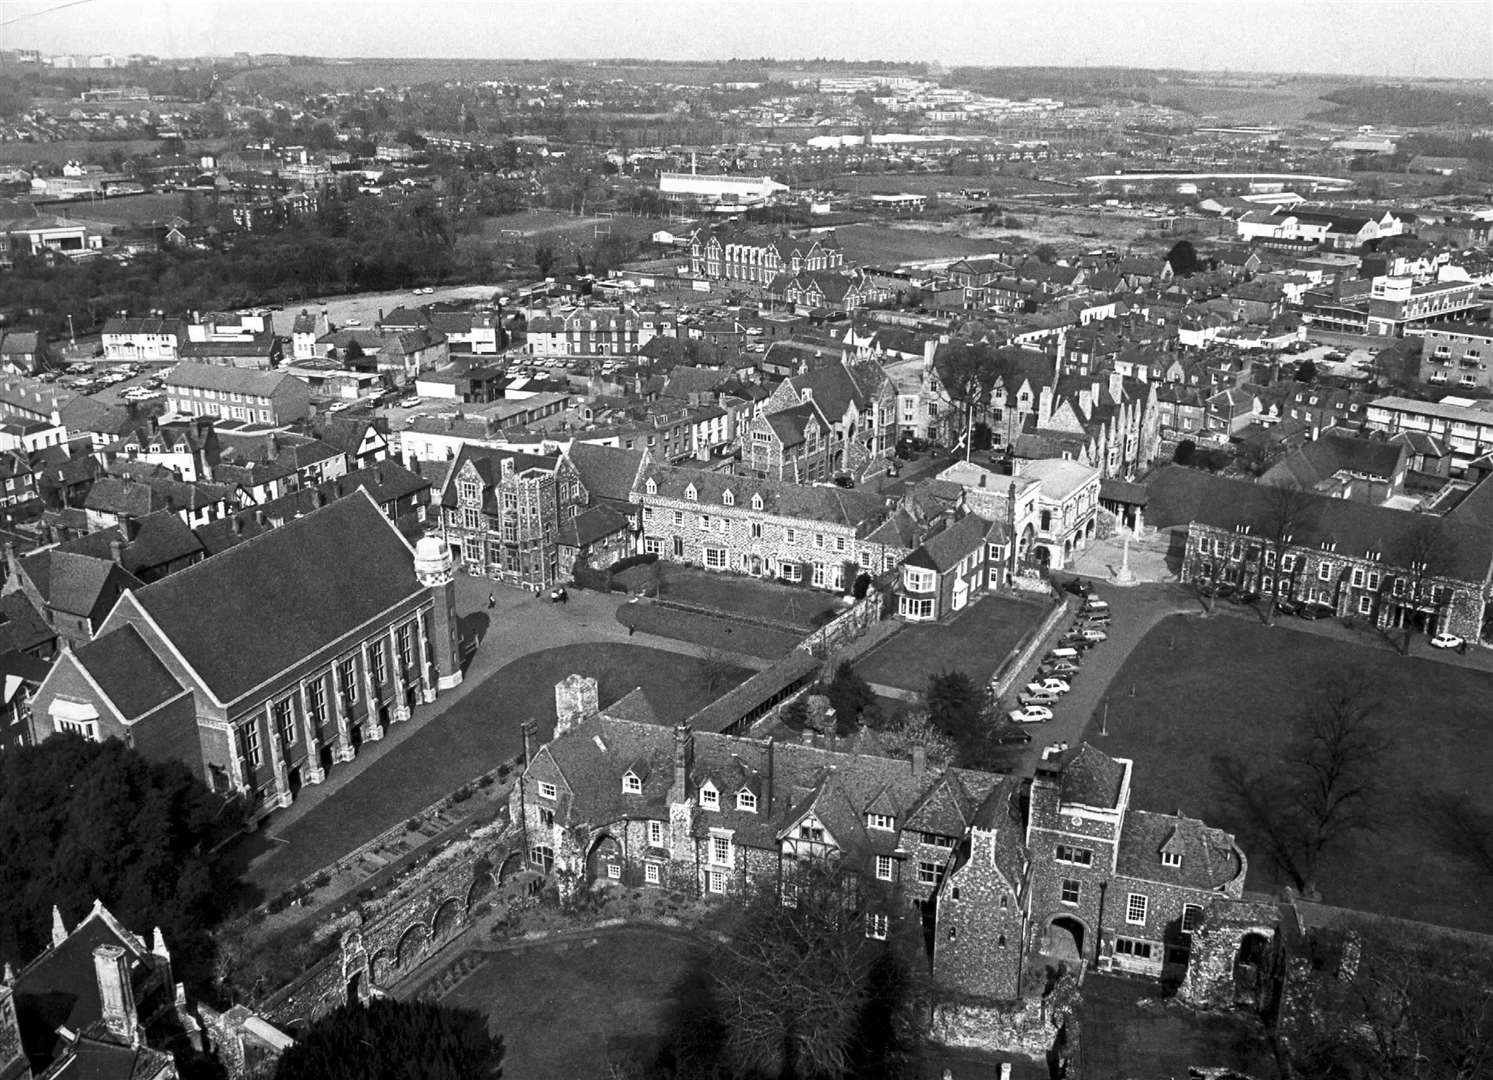 Looking down to King's School from the top of the Cathedral